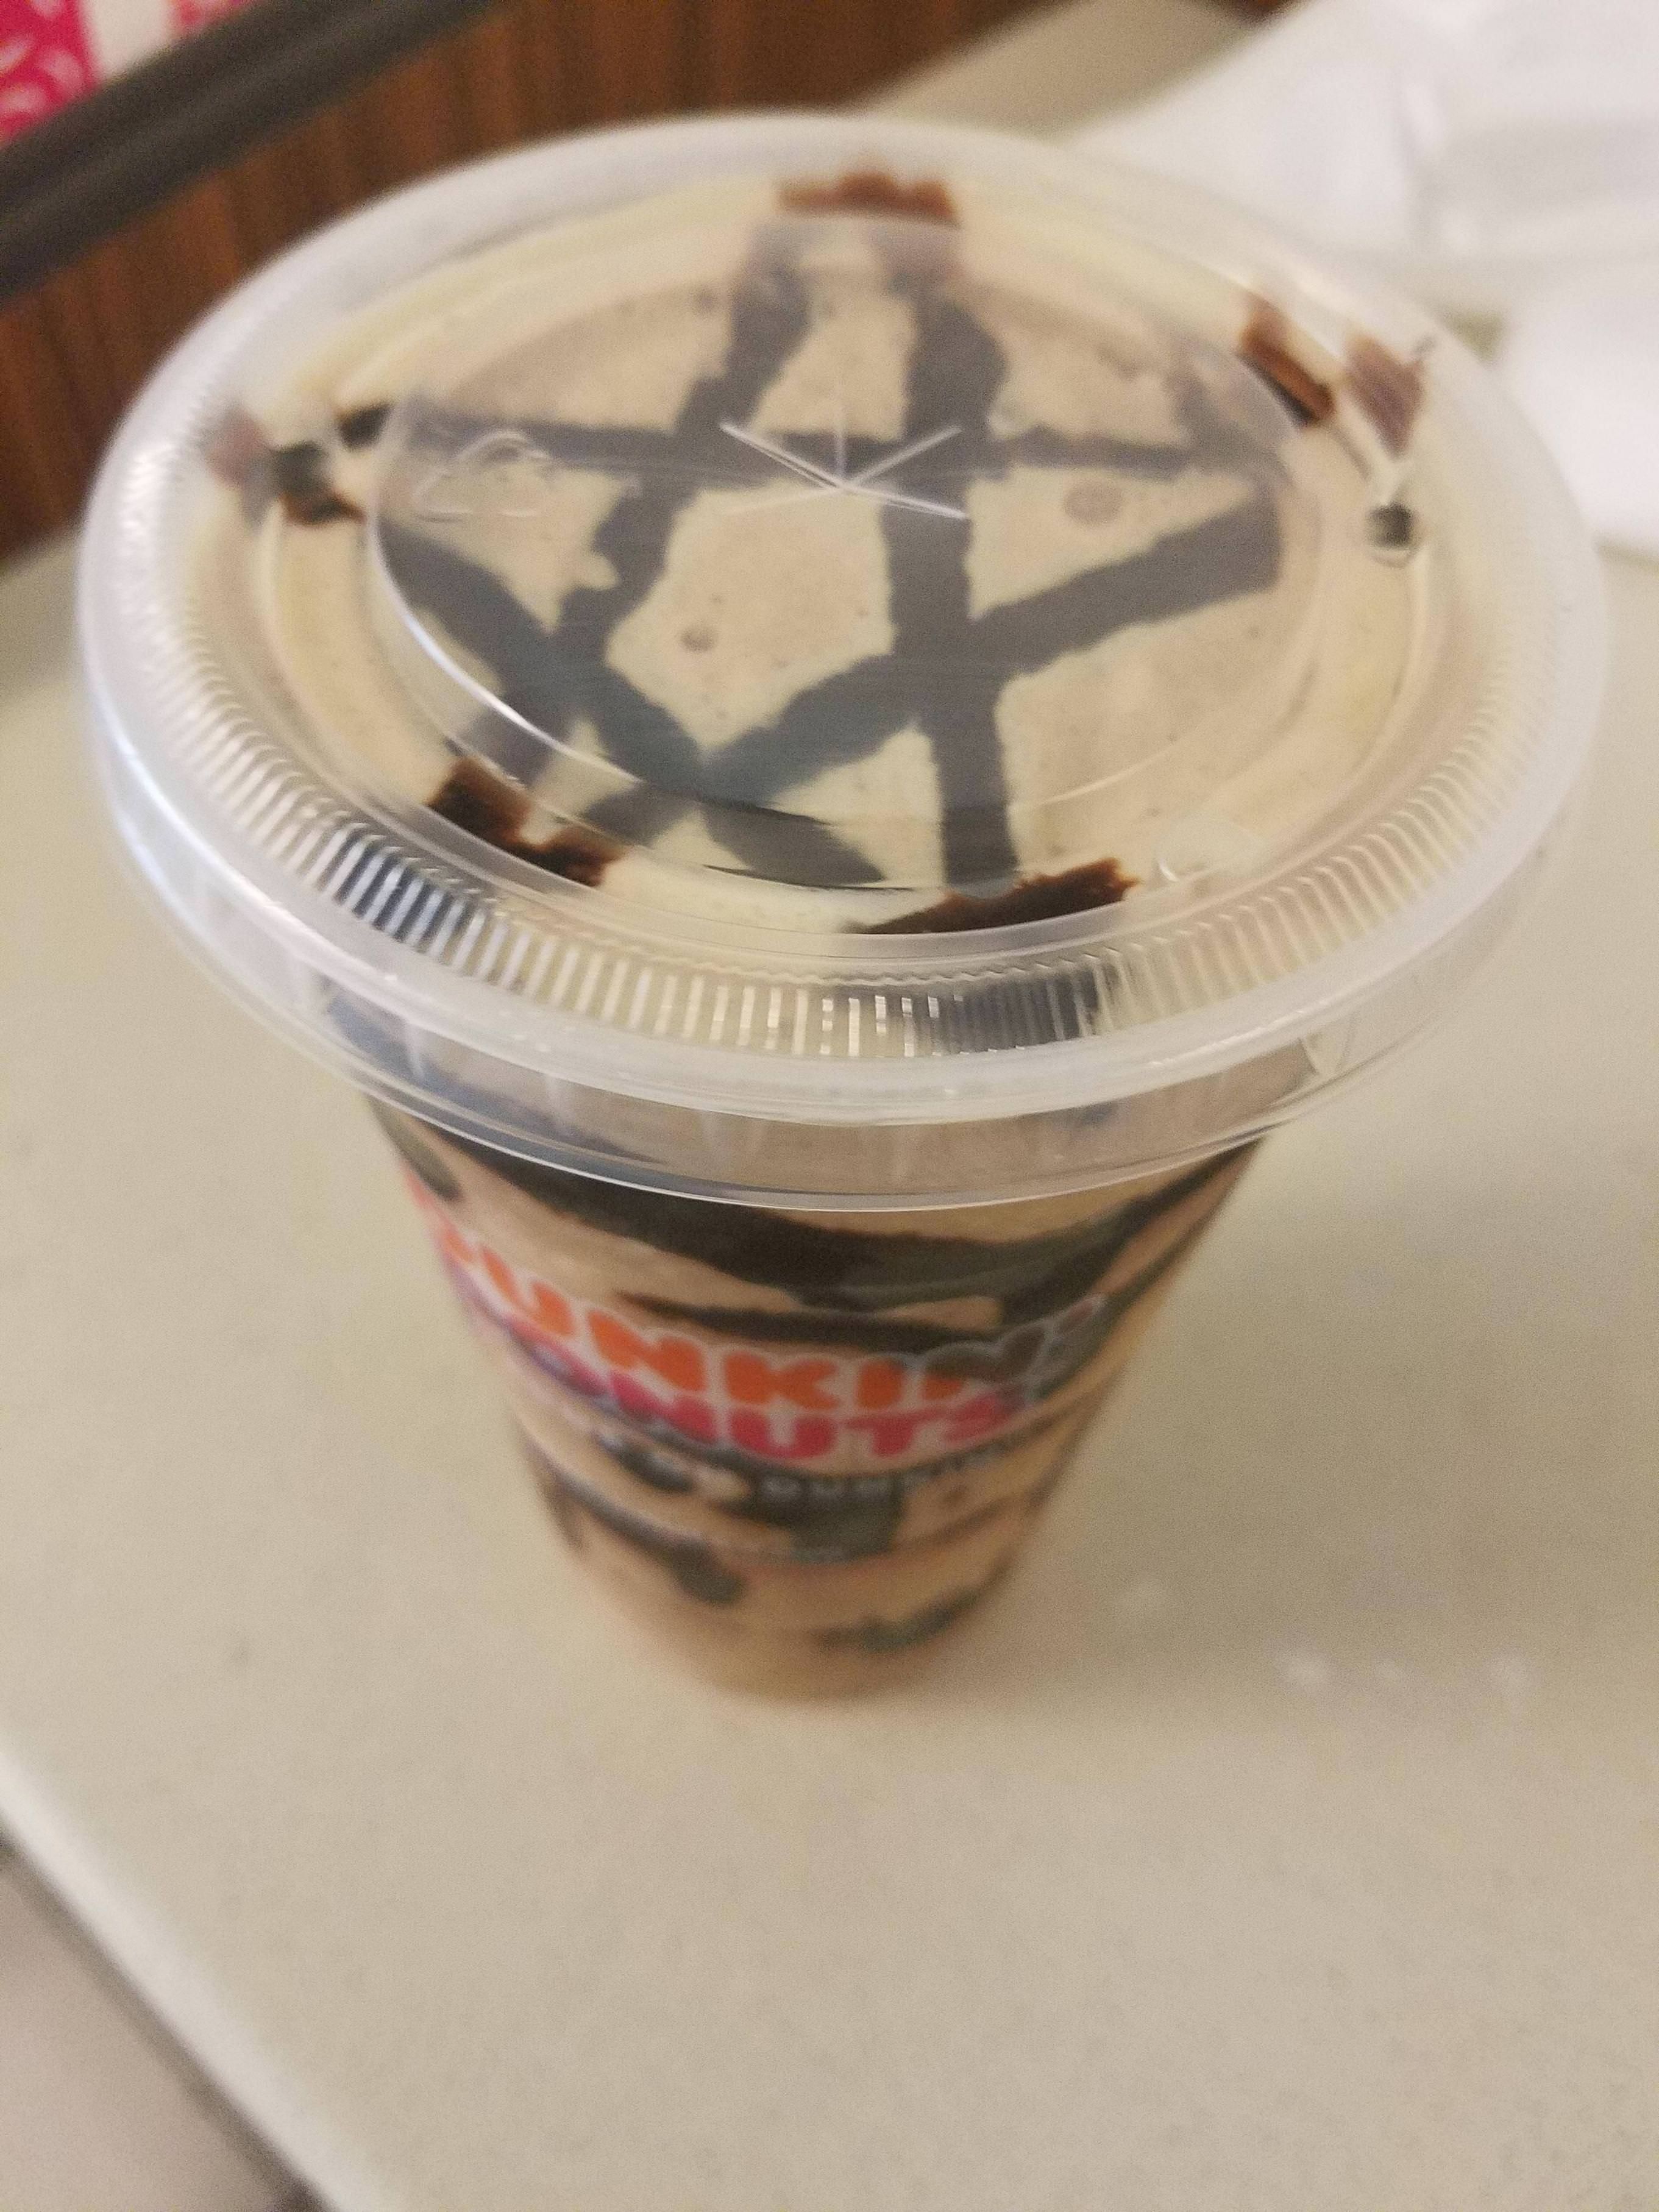 My local Dunkin Donuts has chosen me to serve the Dark Lord.